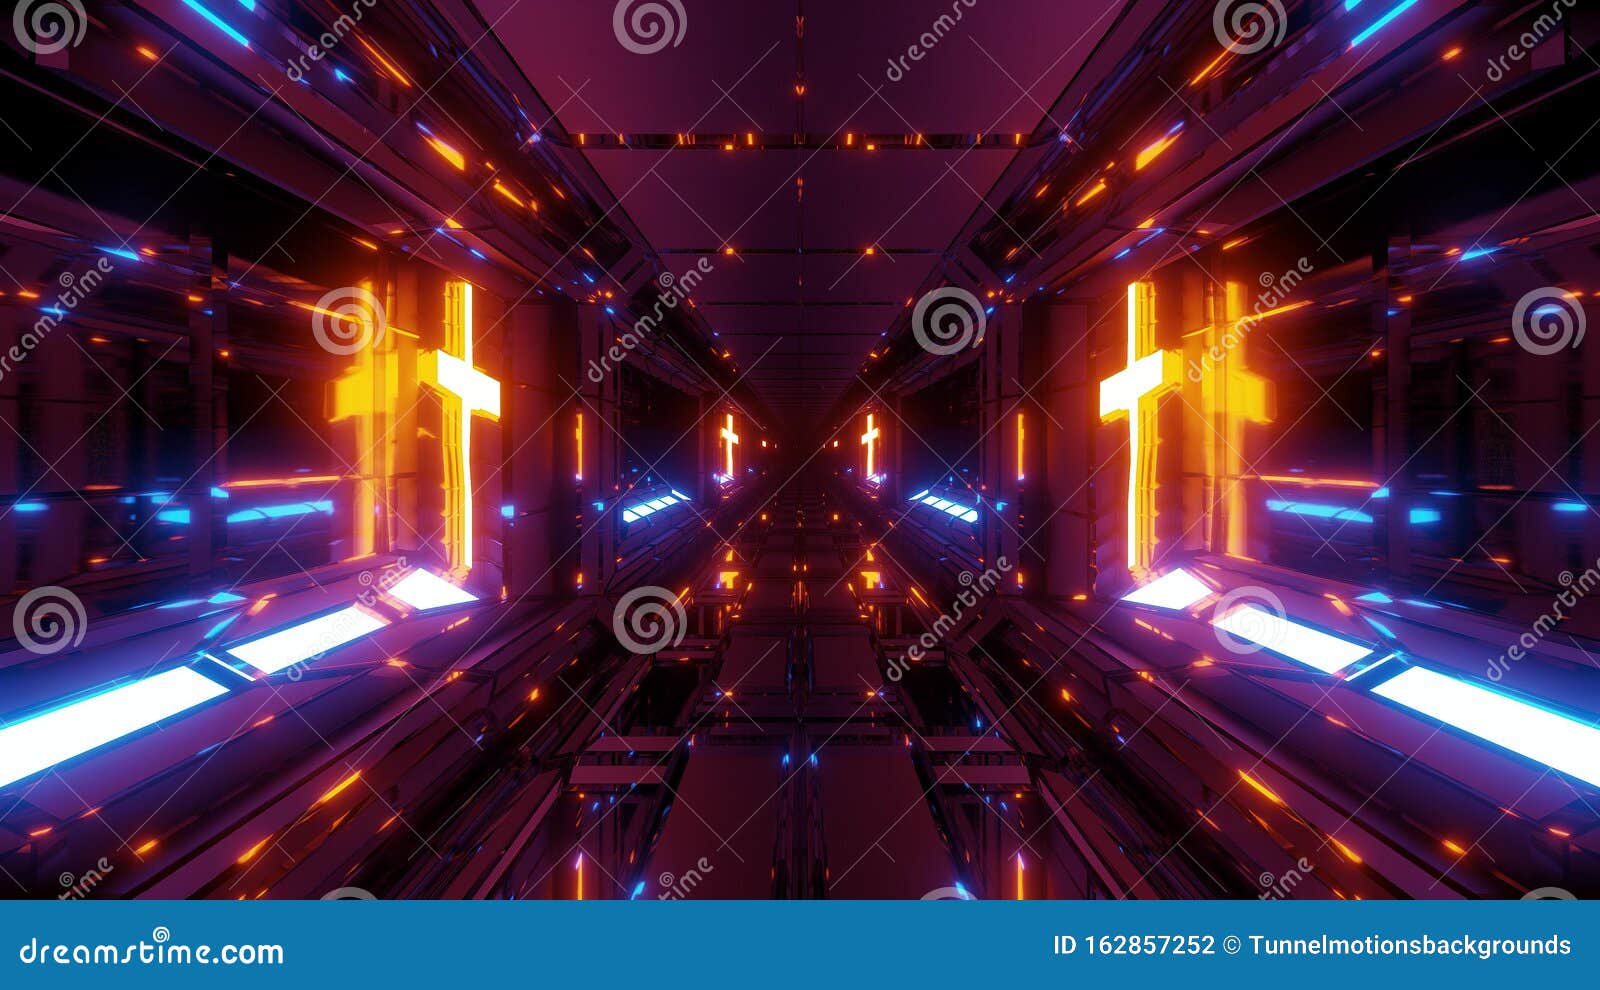 Cool Futuristic Space Scifi Hangar Tunnel Corridor with Holy Glowing  Christian Cross 3d Illustration Live Wallpaper Stock Illustration -  Illustration of three, tunnel: 162857252